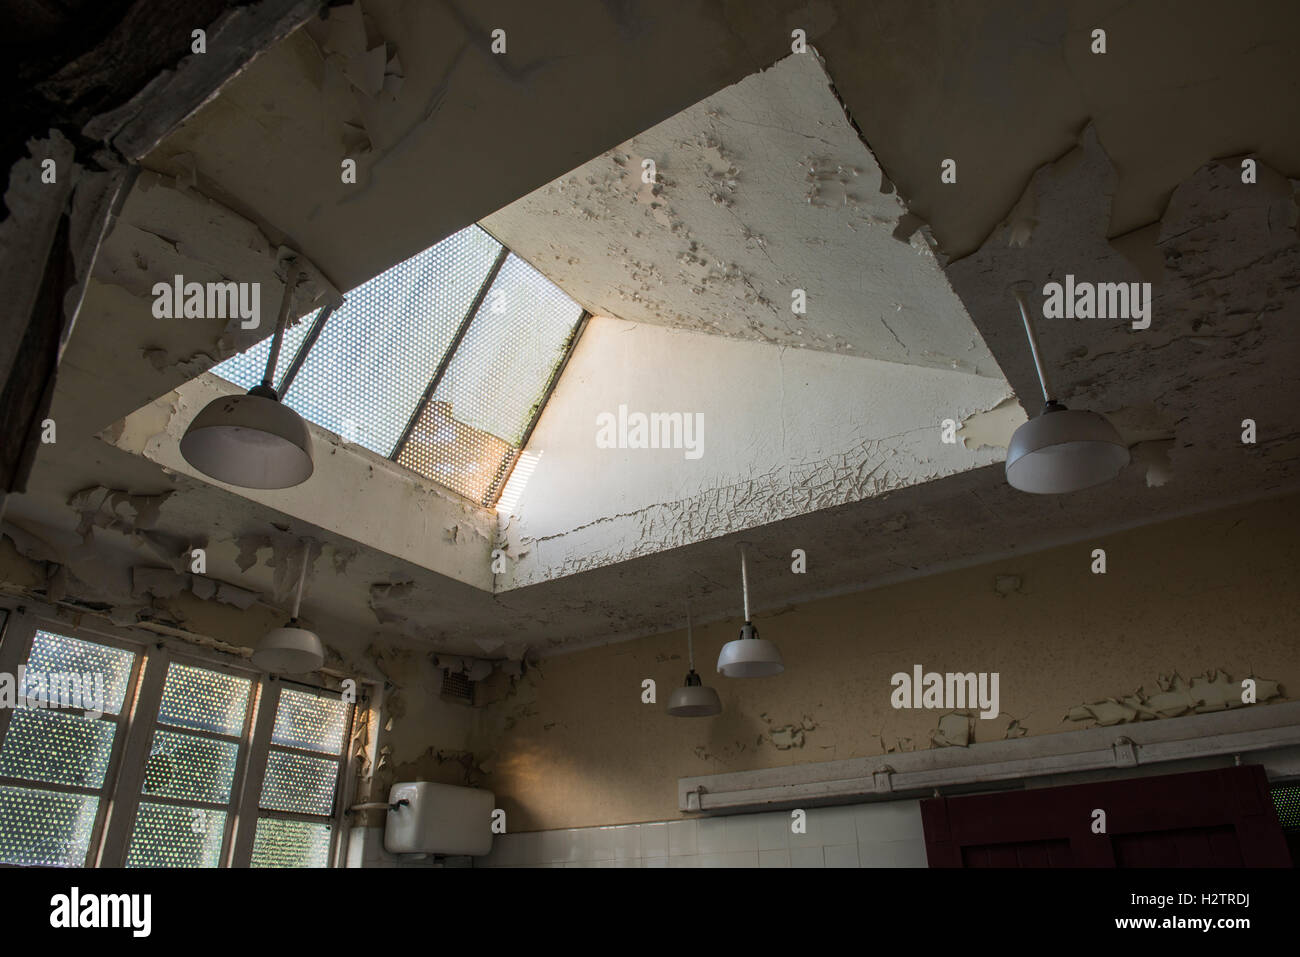 Skylight and ceiling inside Maiden Law Hospital Mortuary, Lanchester Rd, Lanchester, County Durham, UK Stock Photo